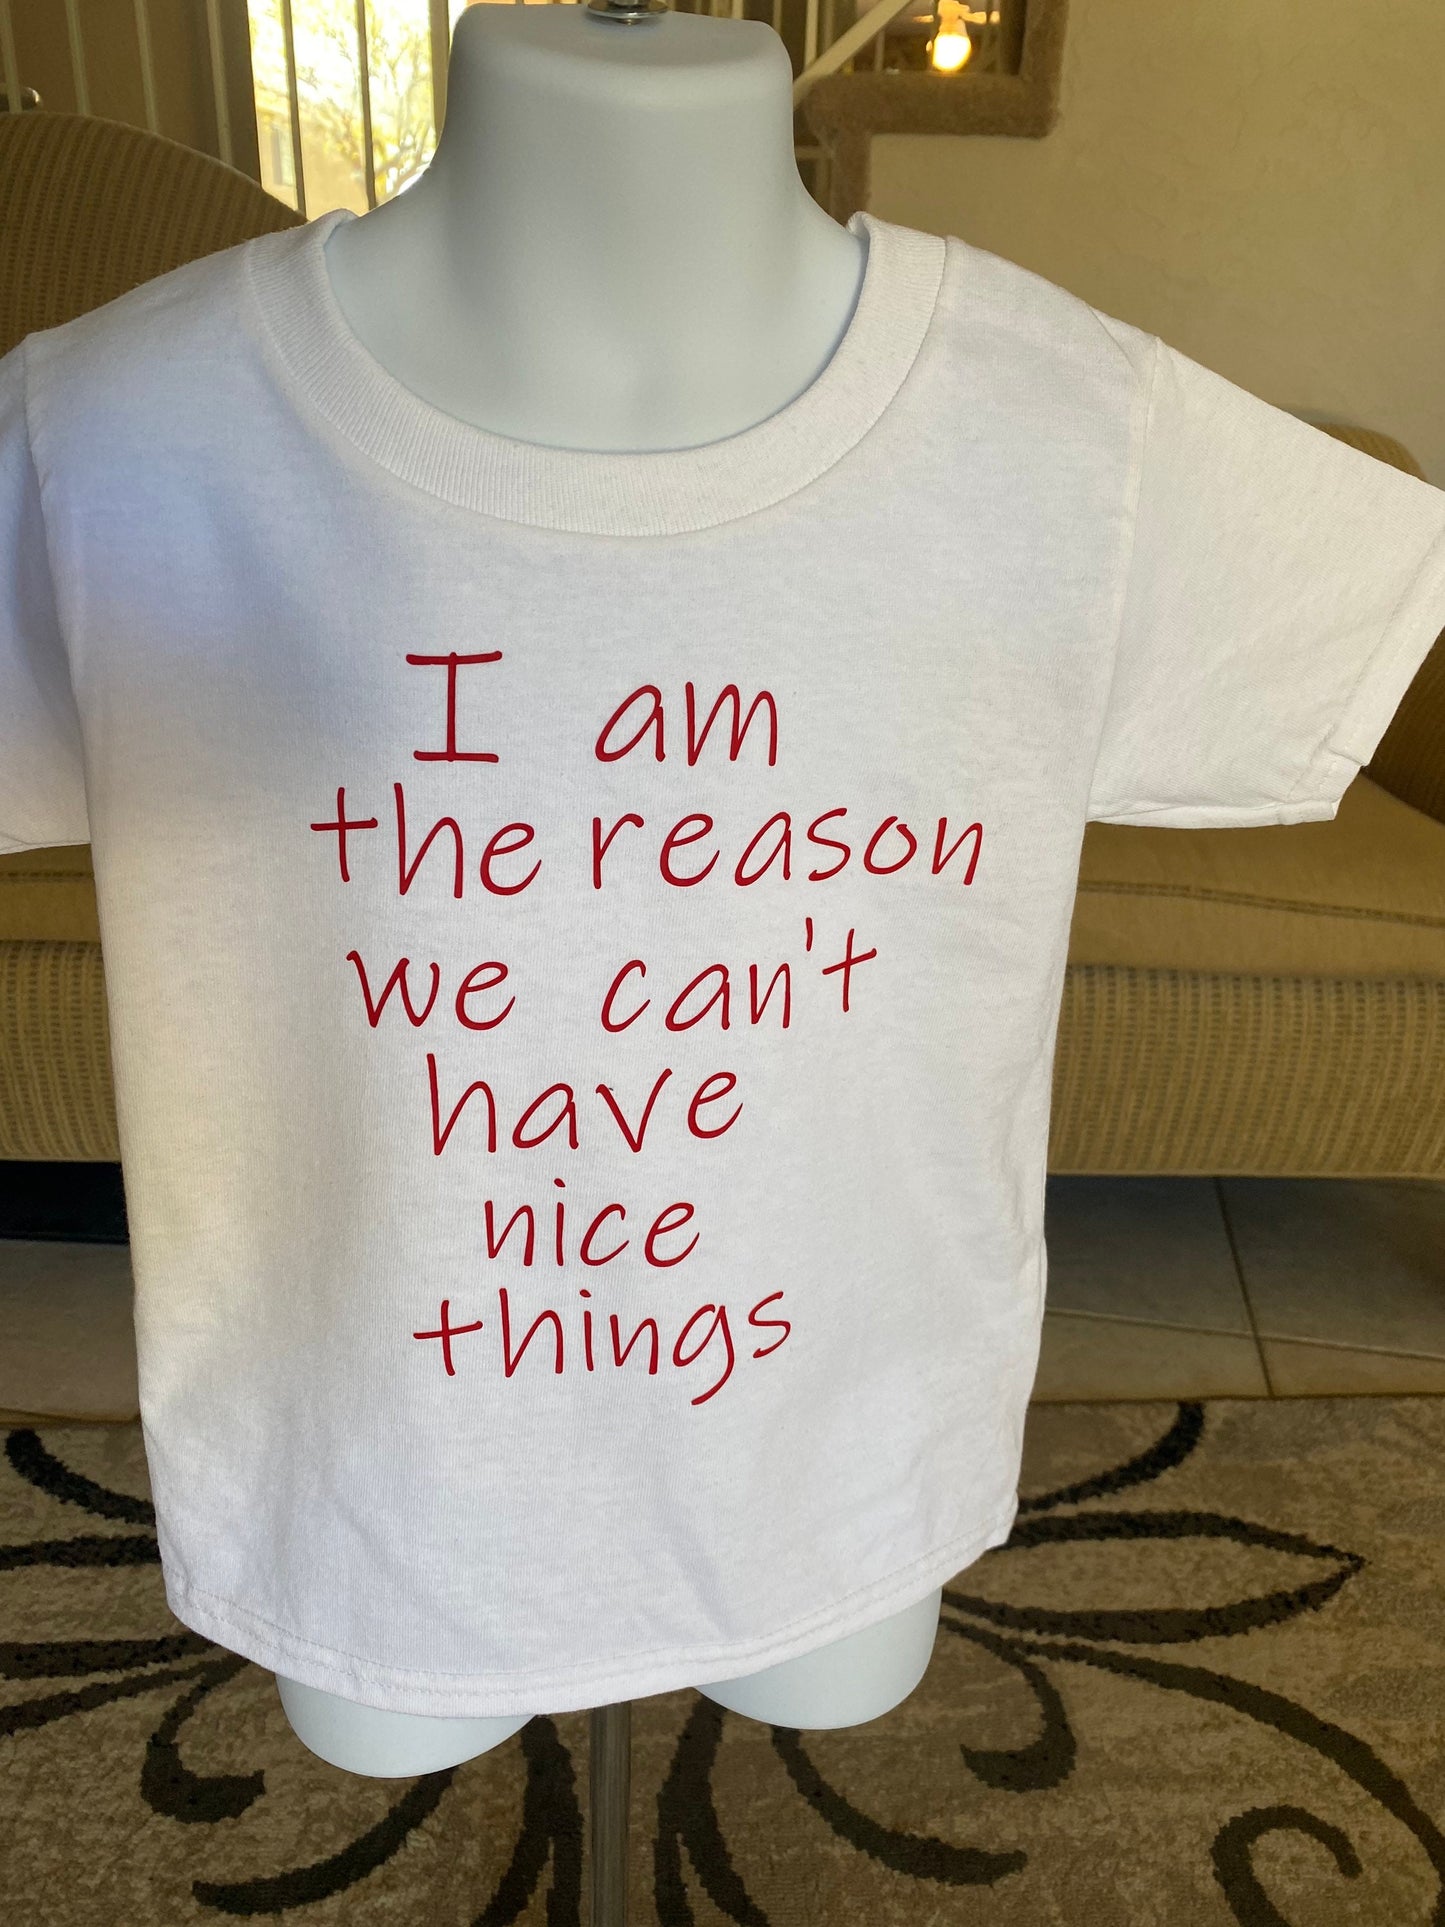 I am the reason we can't have nice things / funny shirt /funny tshirt/funny t shirt / cant have nice things/funny kids shirt/reckless gift